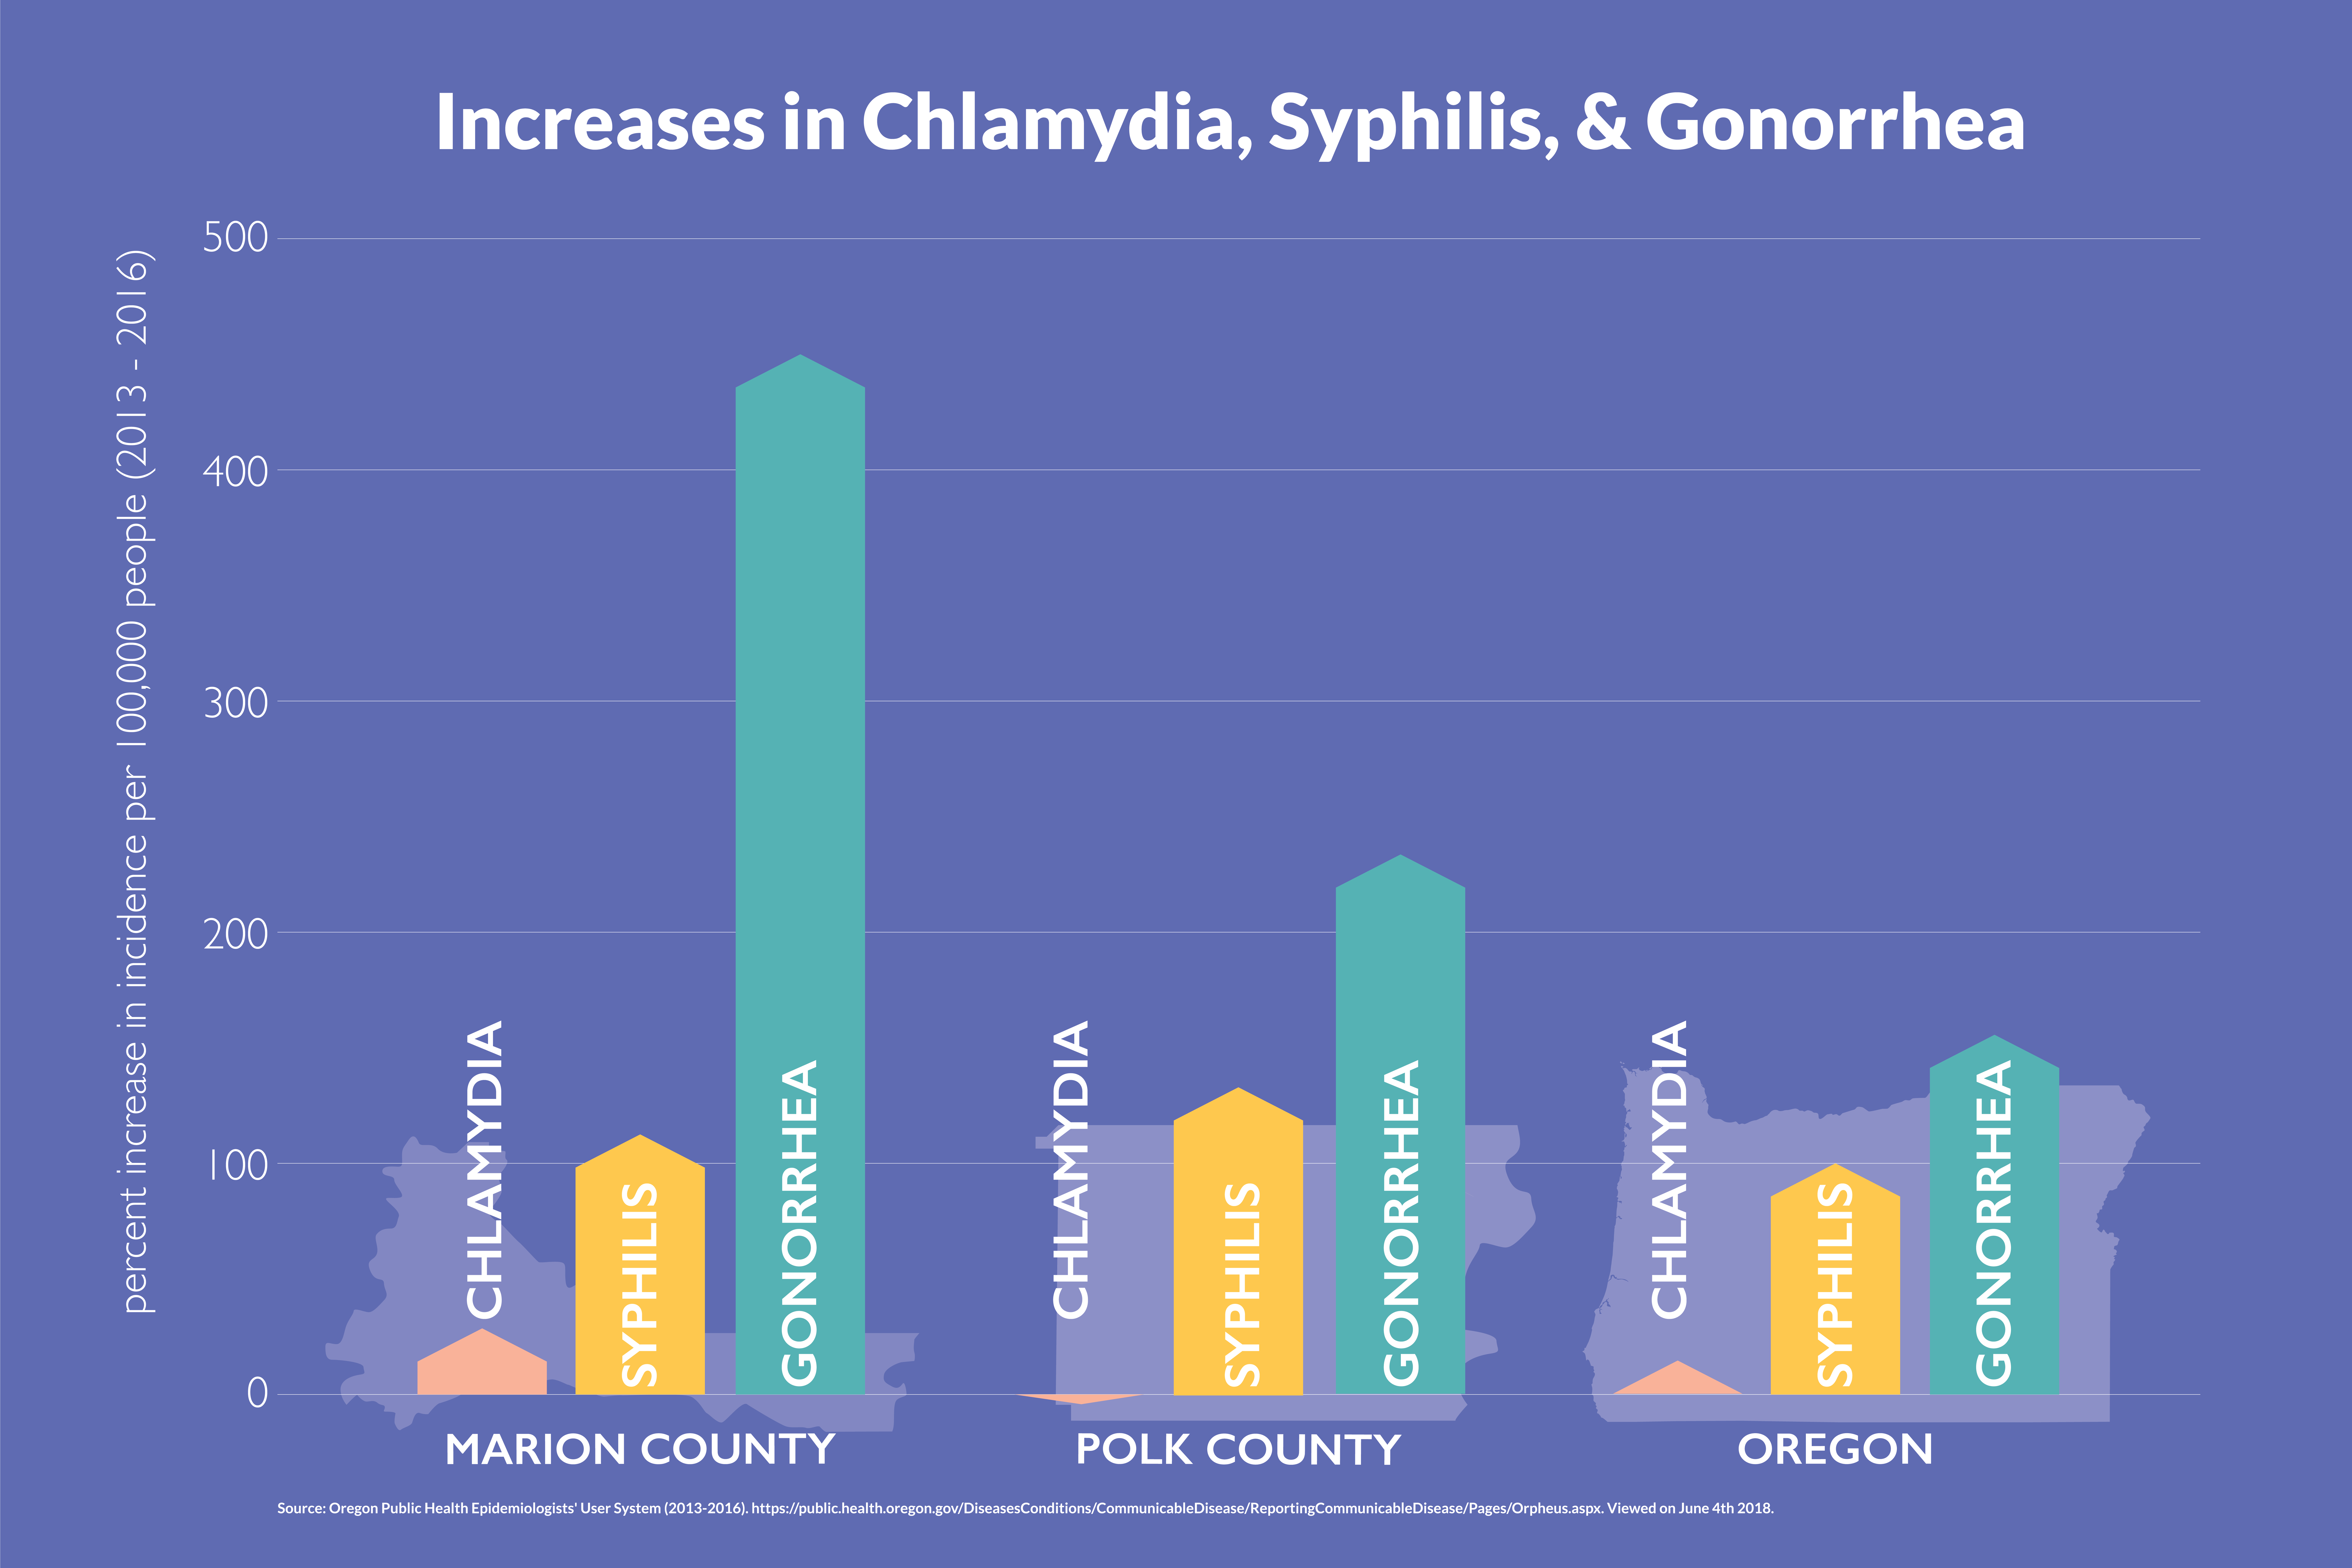 Increases in Chlamydia Syphilis and Gonorrhea